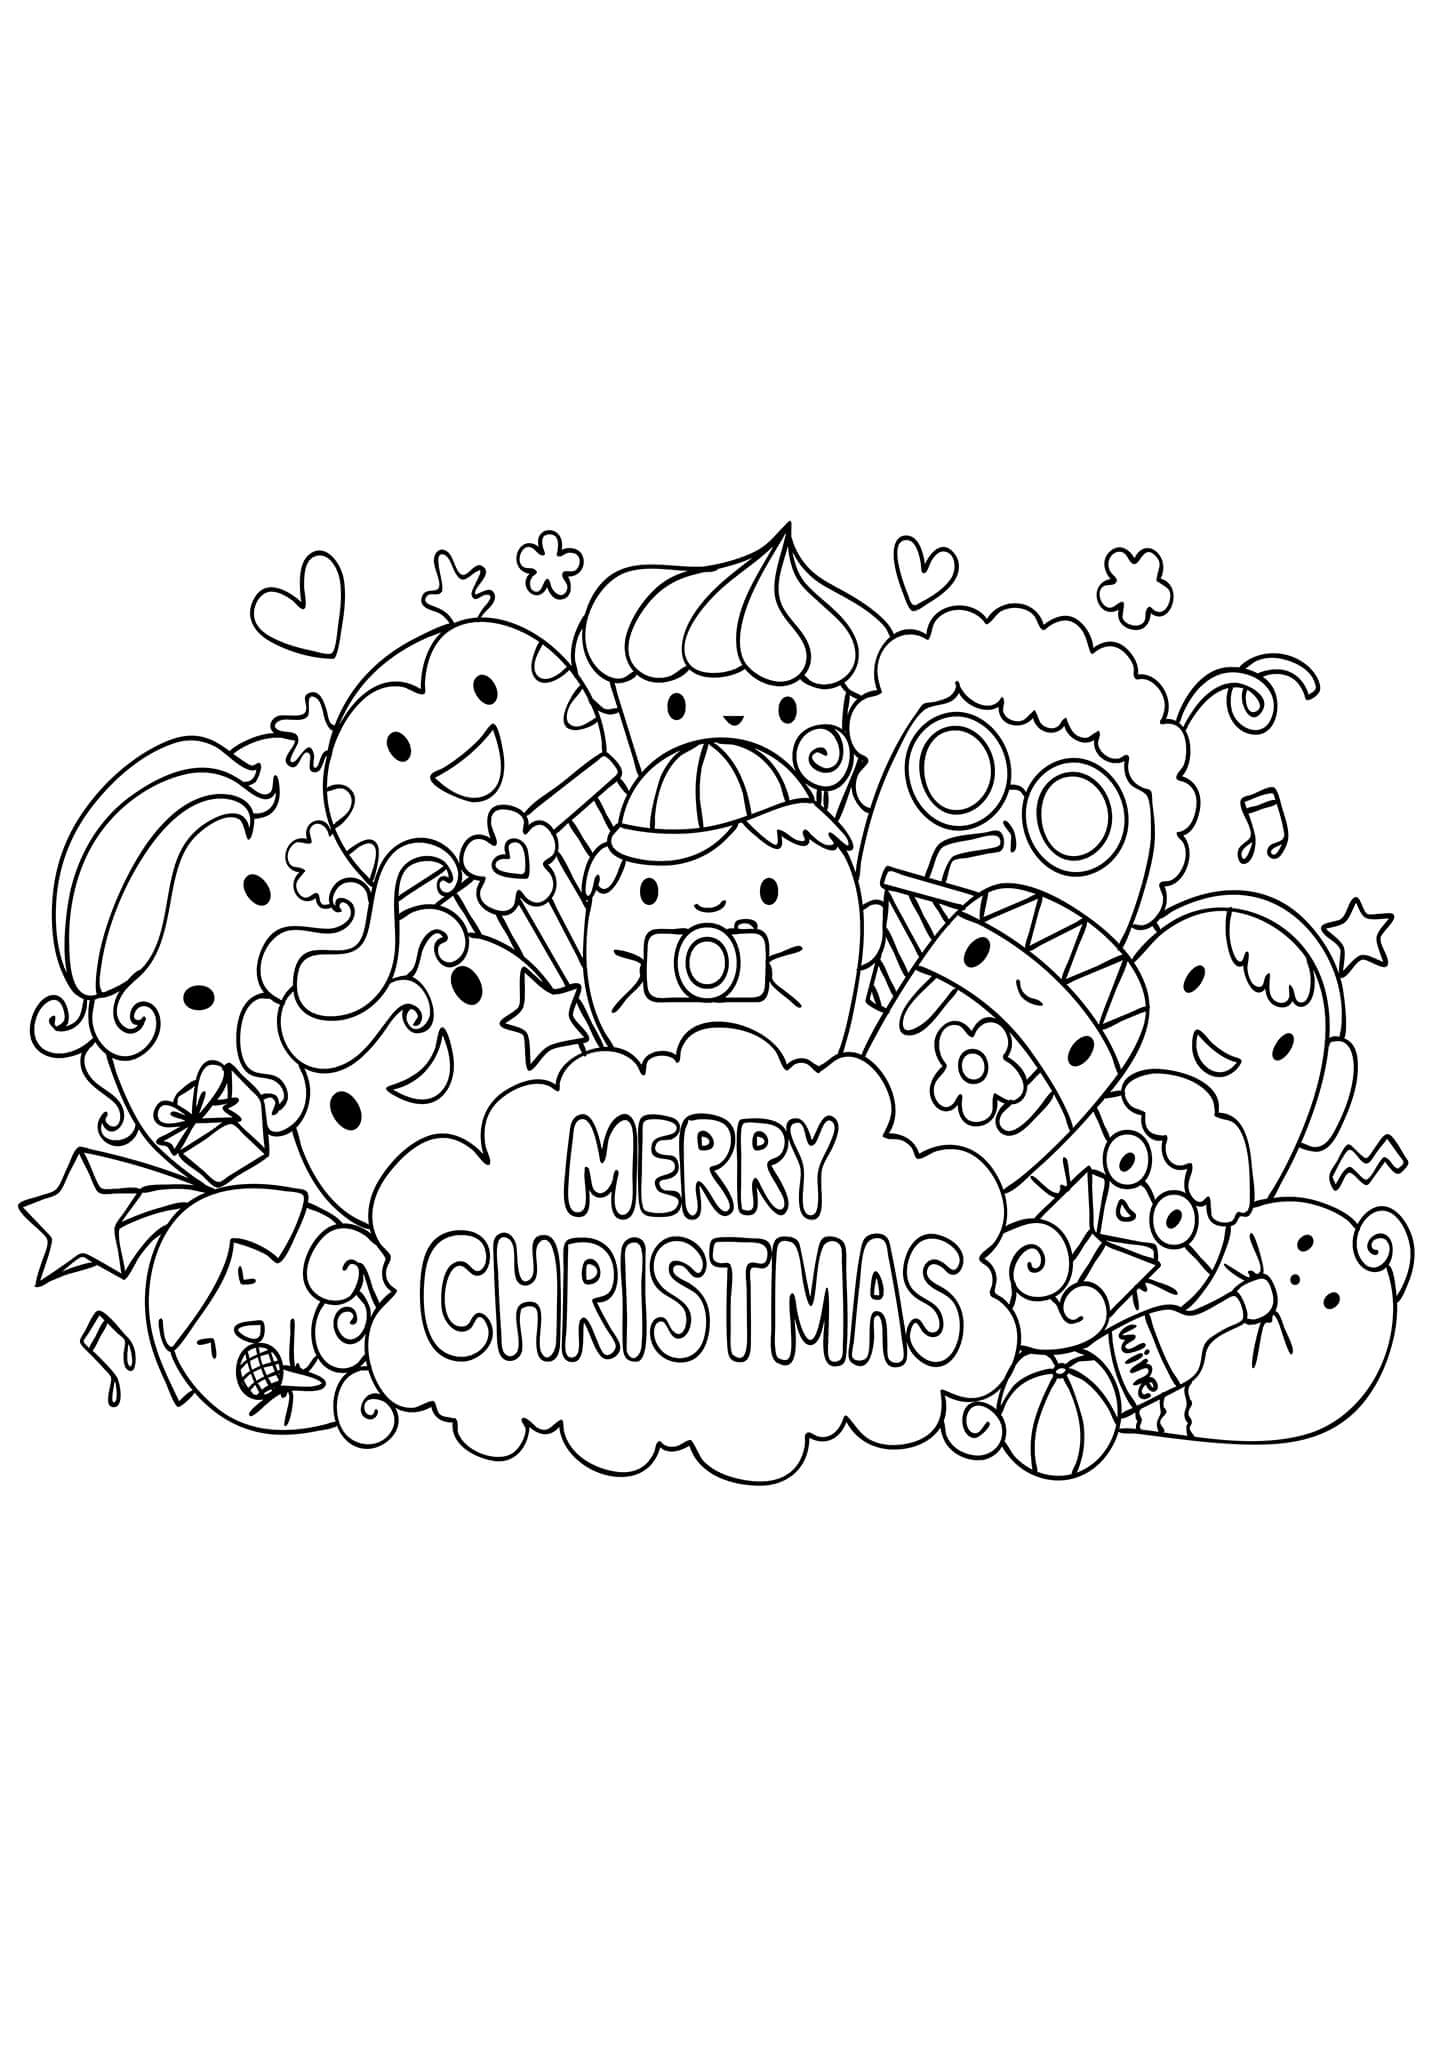 Easy cute christmas coloring pages - hisTros